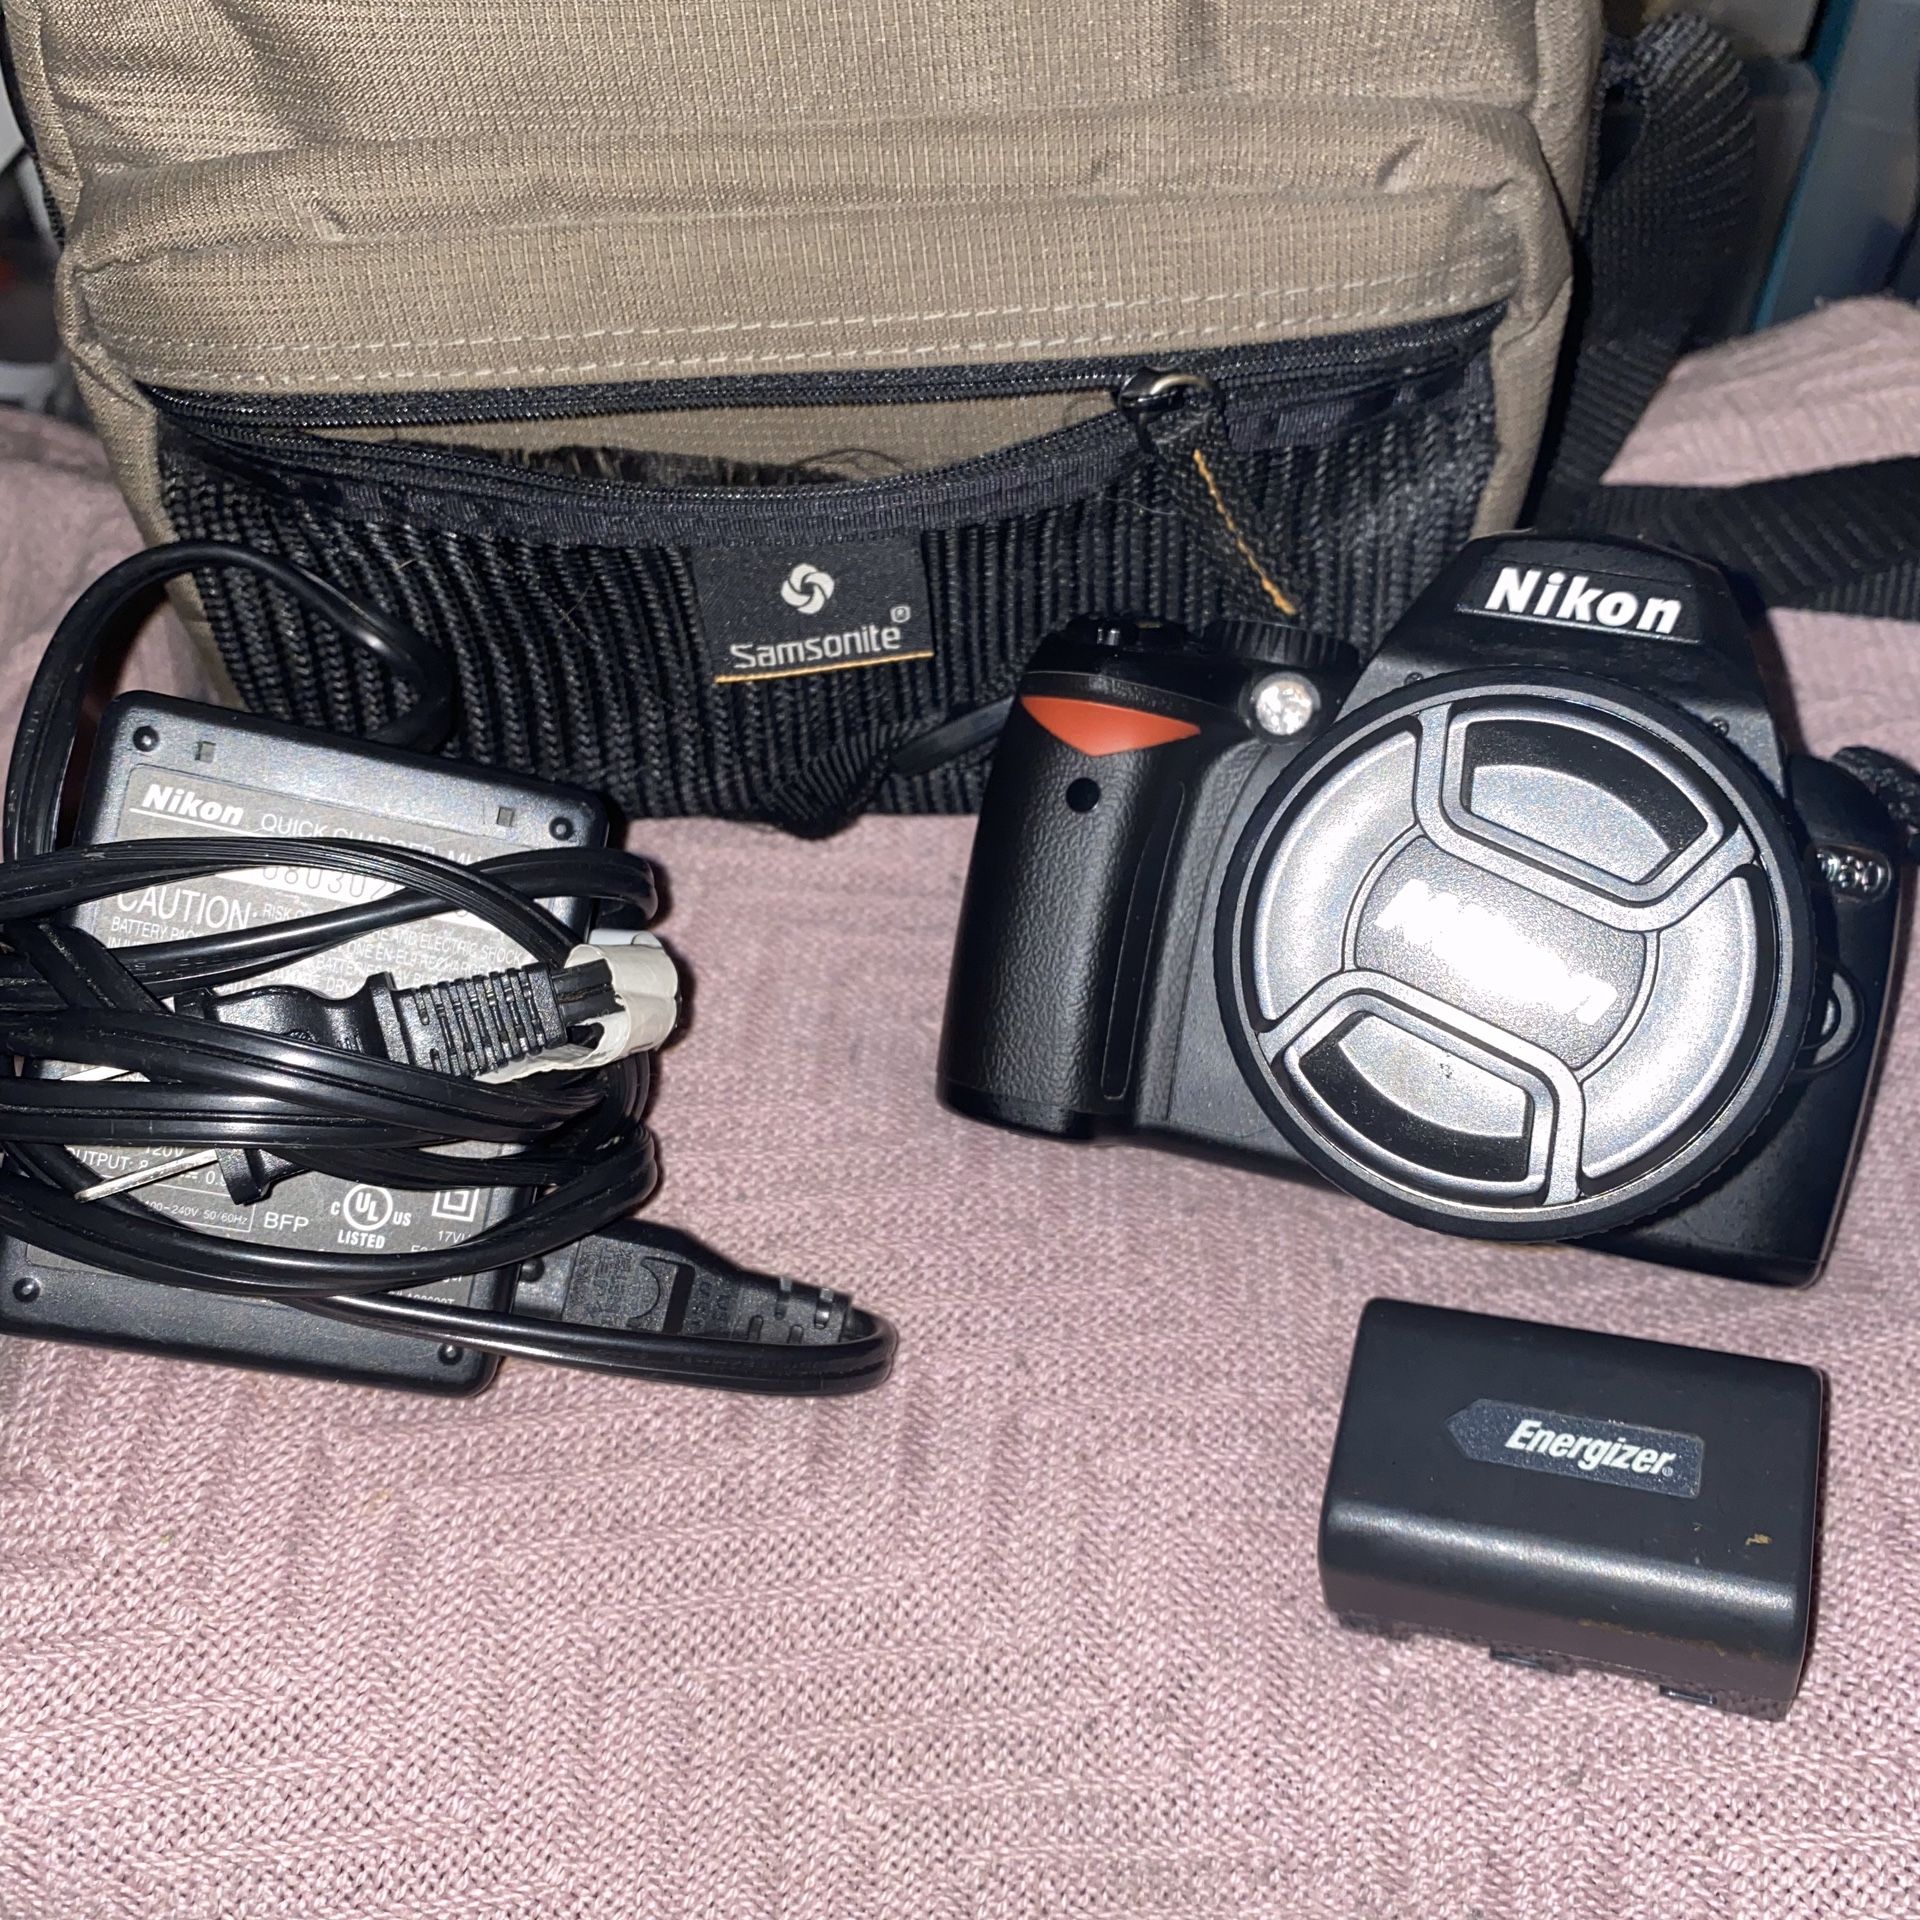 Camera Nikon D60 (camera /case/and batteries only